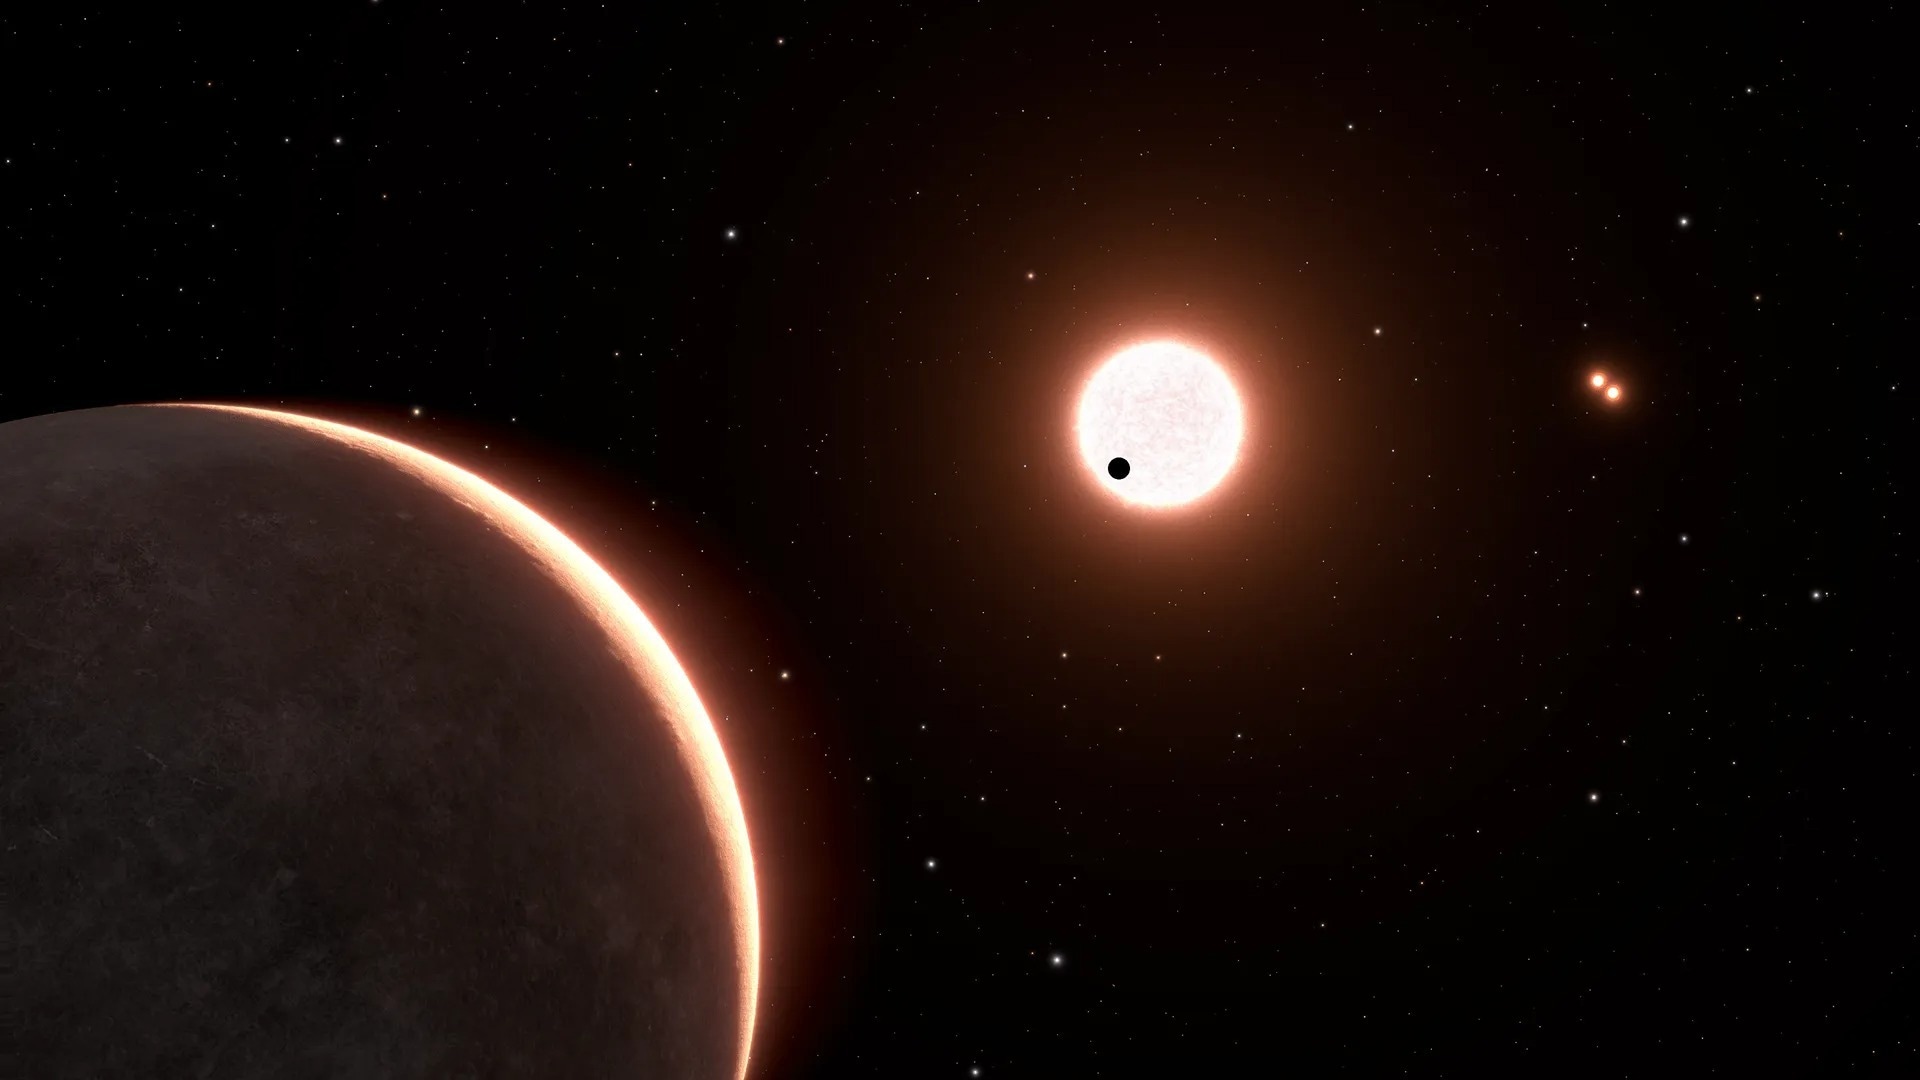 Determination of the Closest Earth-Sized Exoplanet